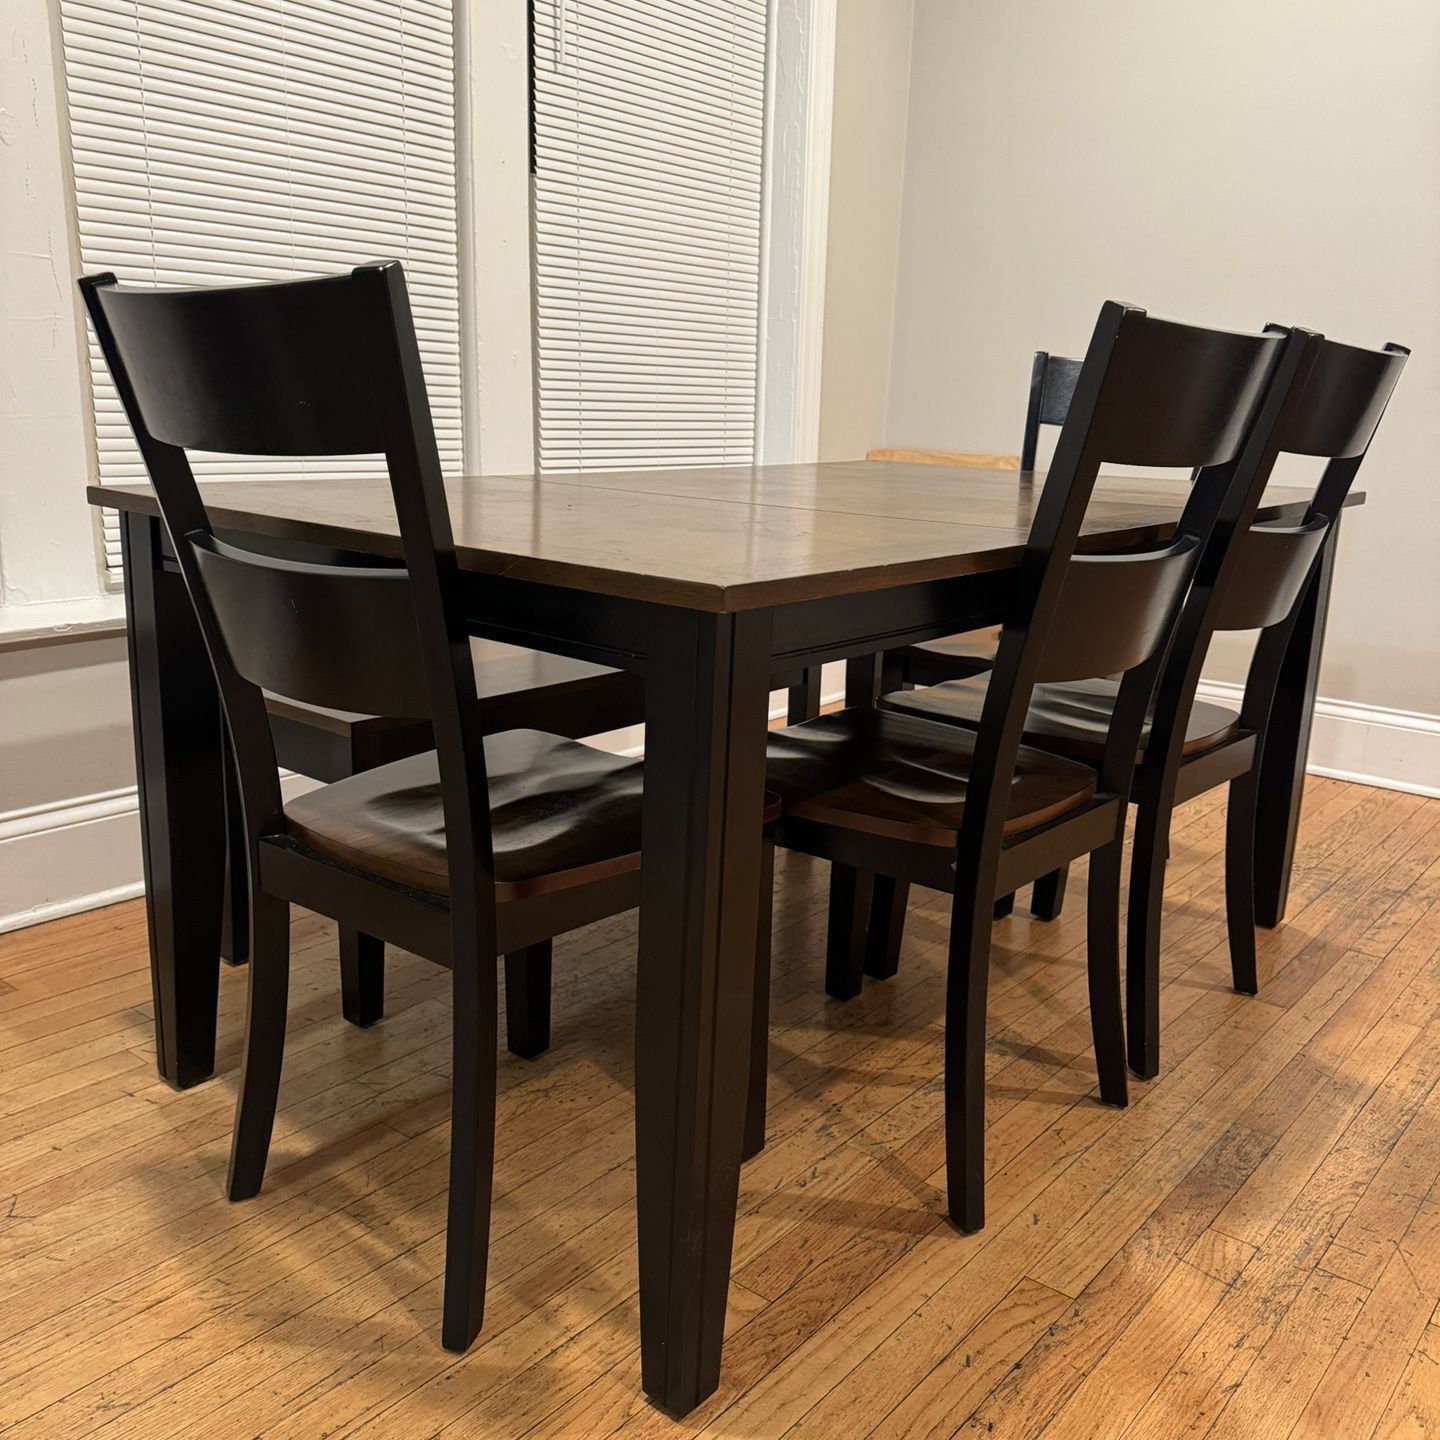 6 Piece - Blake Dining Room Table 